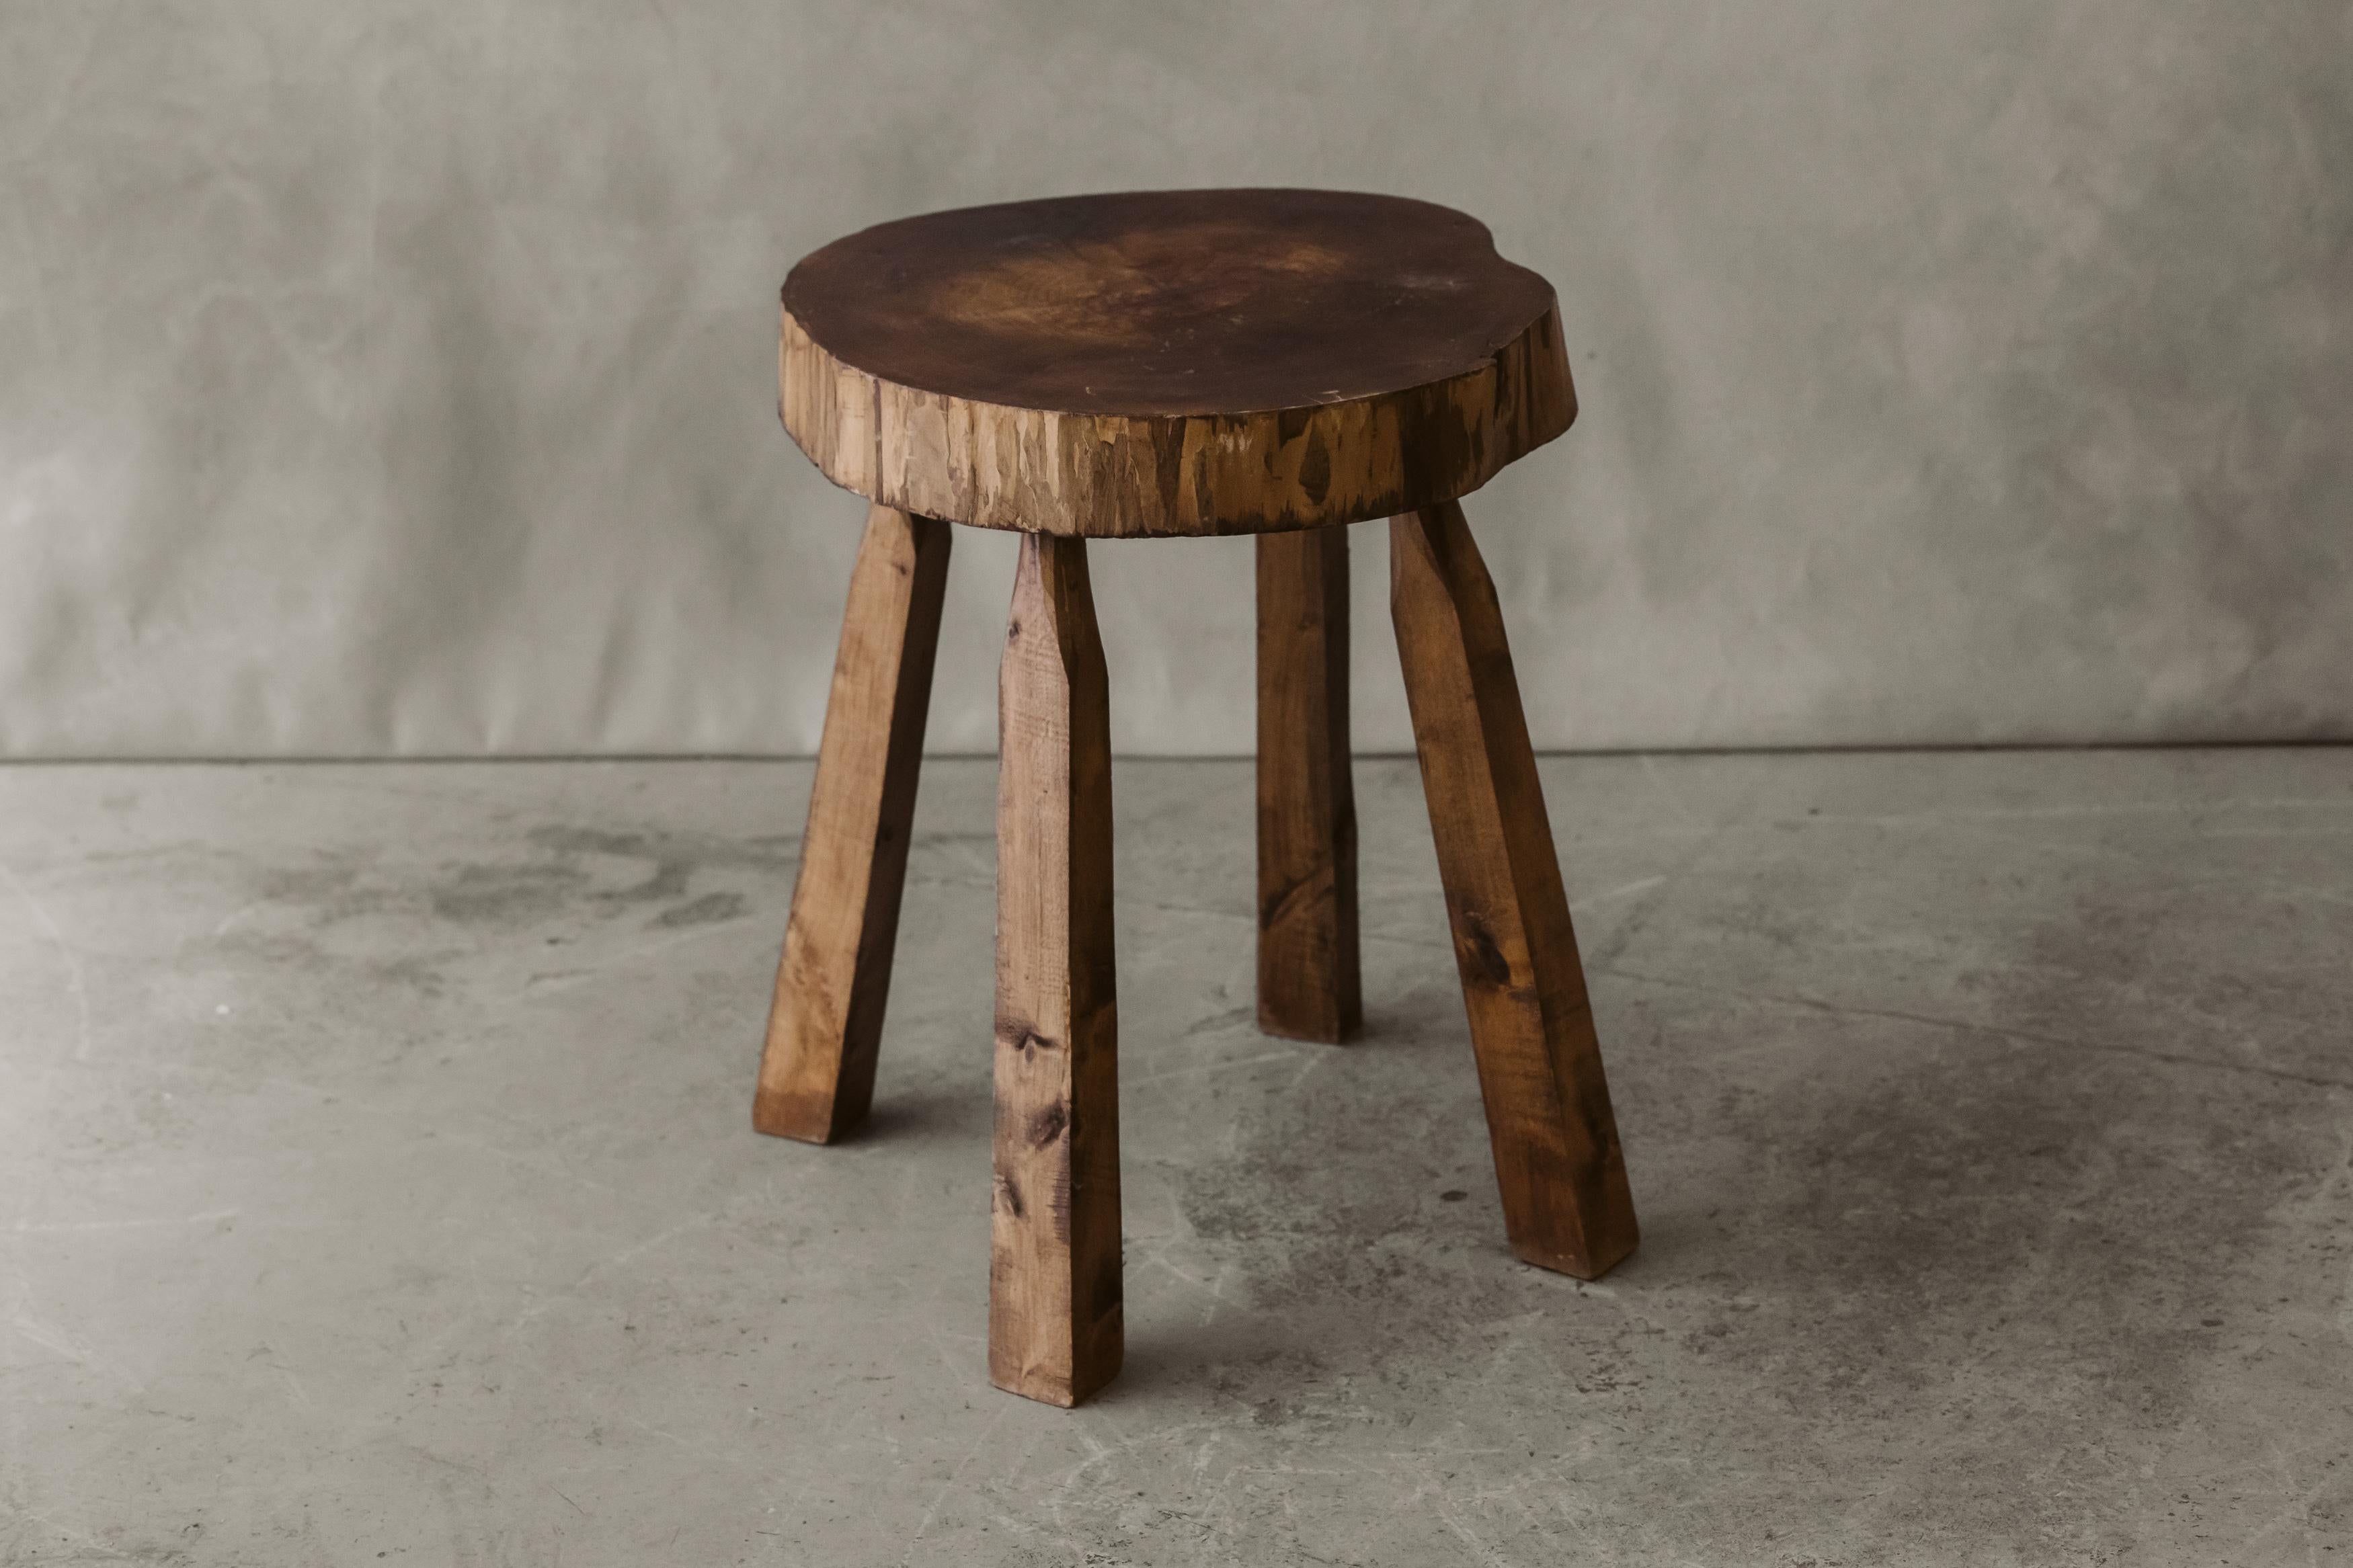 Vintage Live Edge side table From France, Circa 1950. Nice patina and wear.

We don't have the time to write an extensive description on each of our pieces. We prefer to speak directly with our clients.  So, If you have any questions or would like